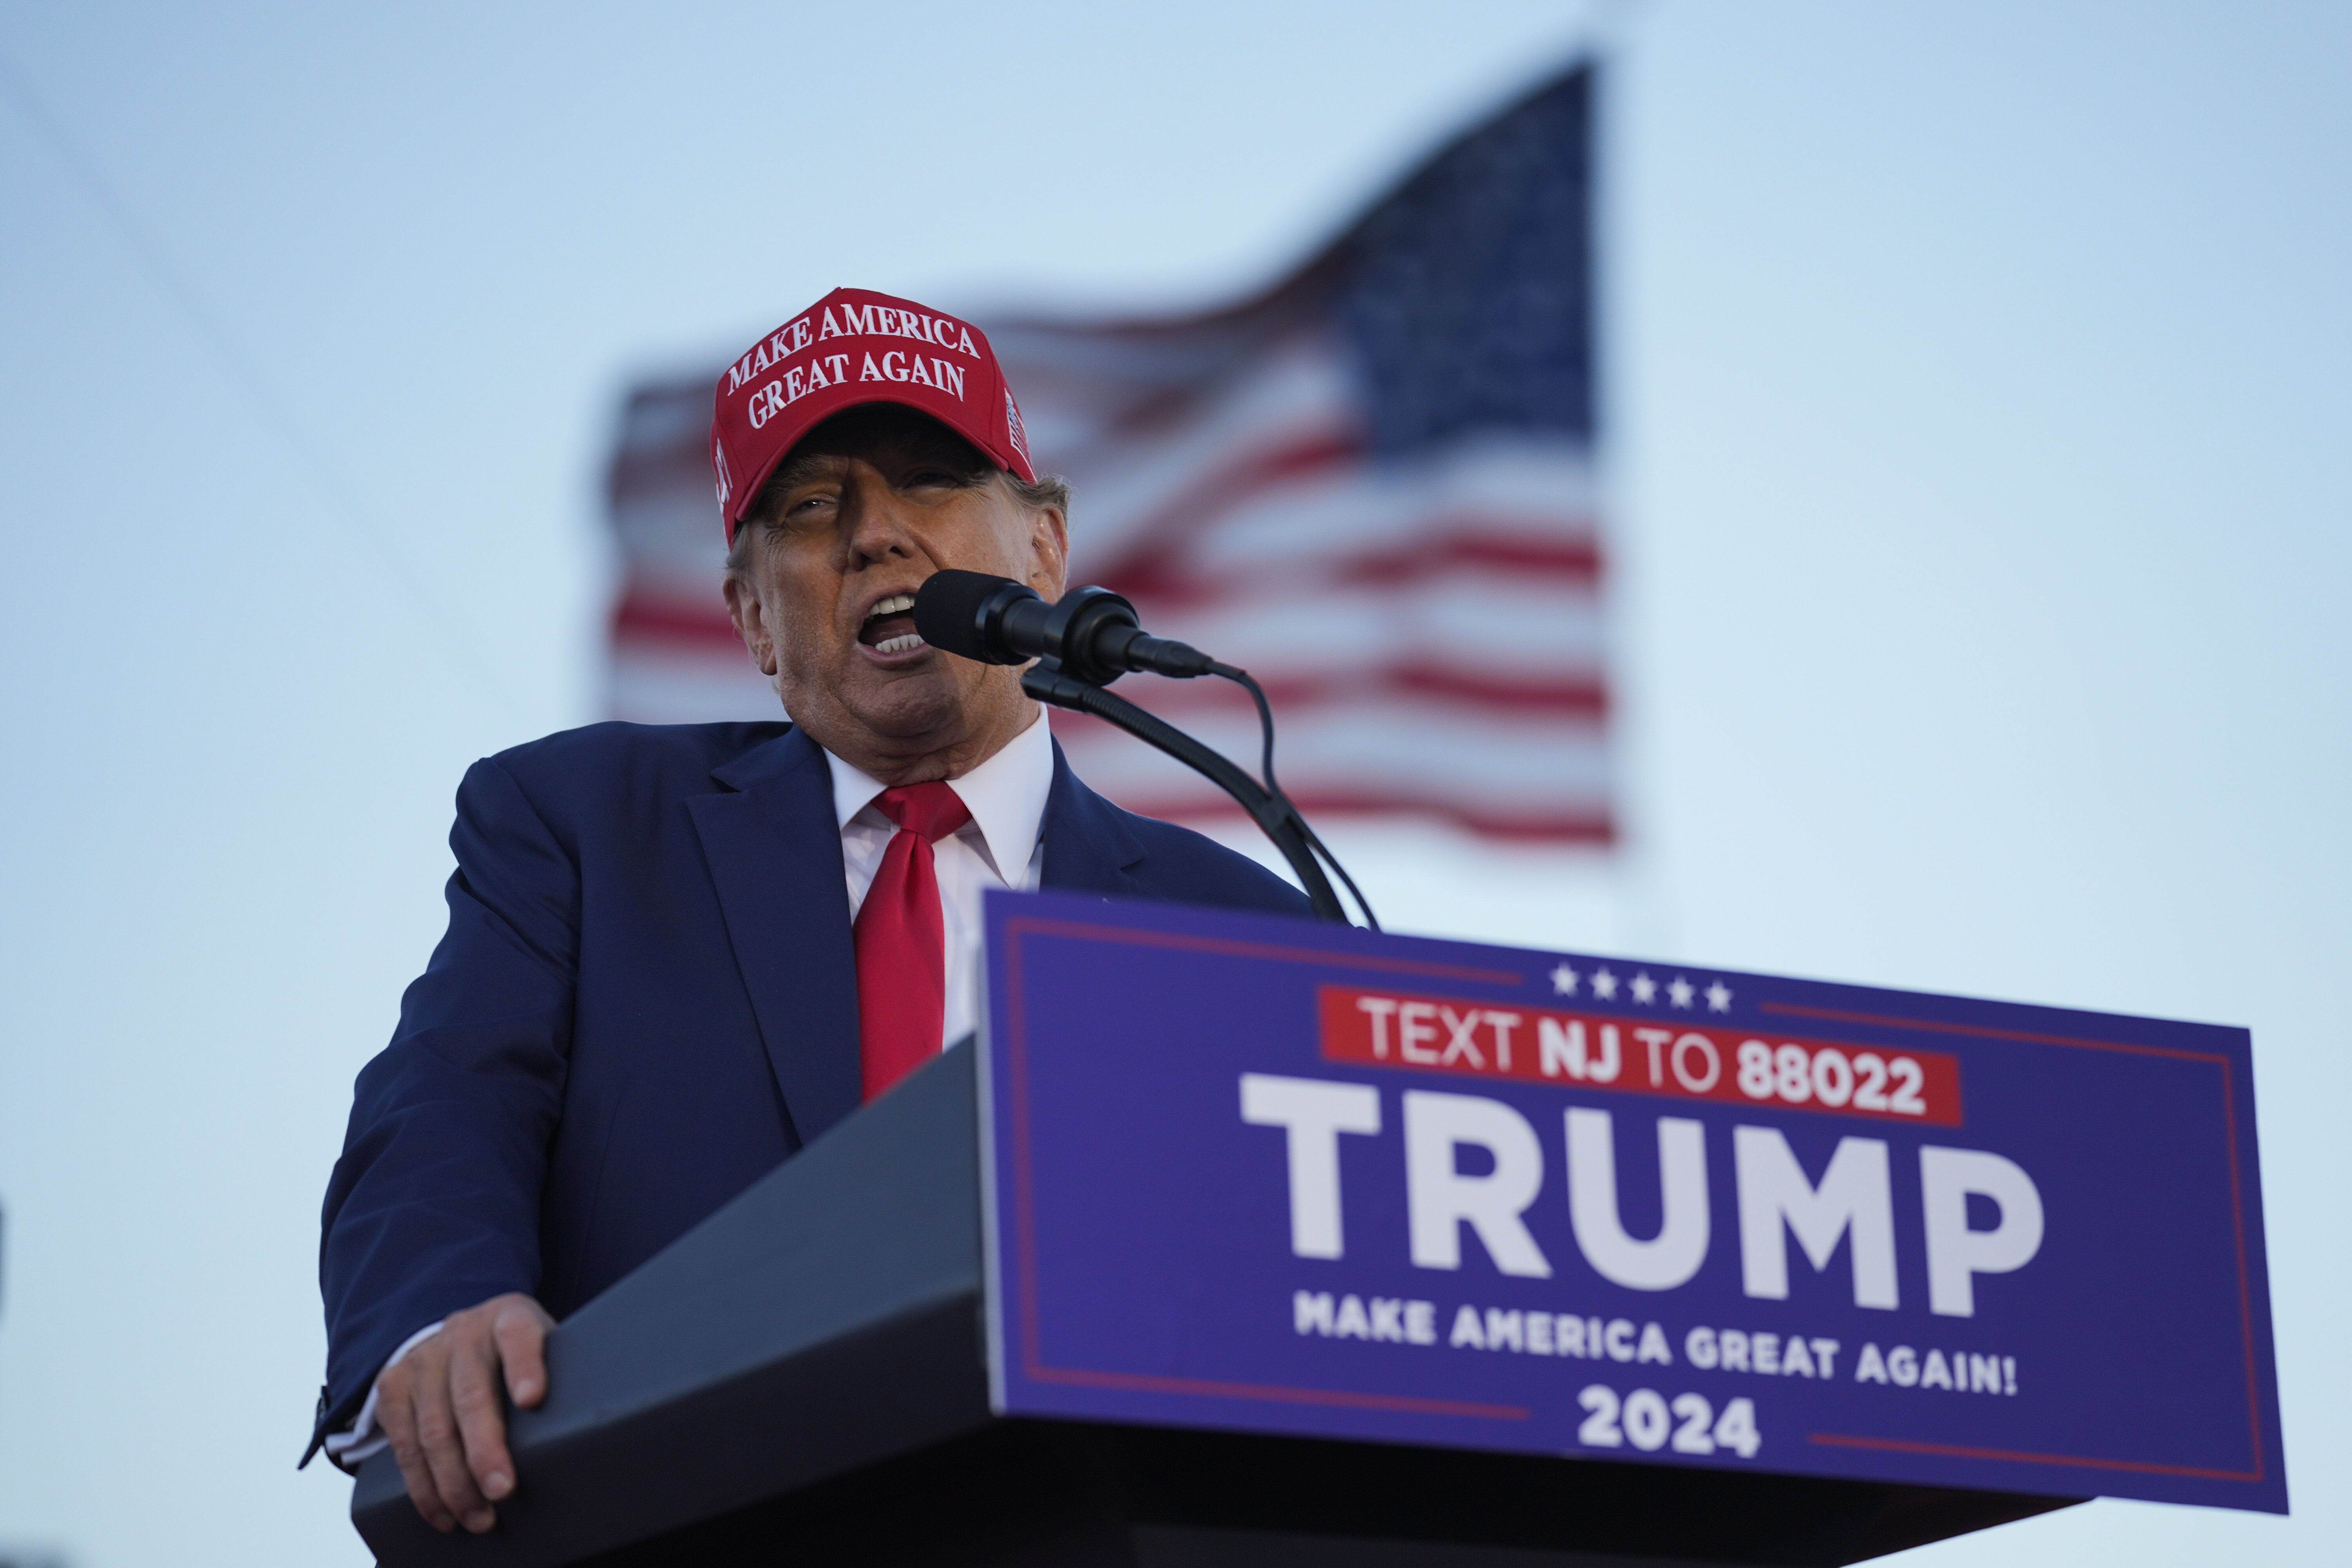 Republican presidential candidate, former President Donald Trump speaks at a campaign rally in Wildwood, N.J., Saturday, May 11, 2024. (AP Photo/Matt Rourke)